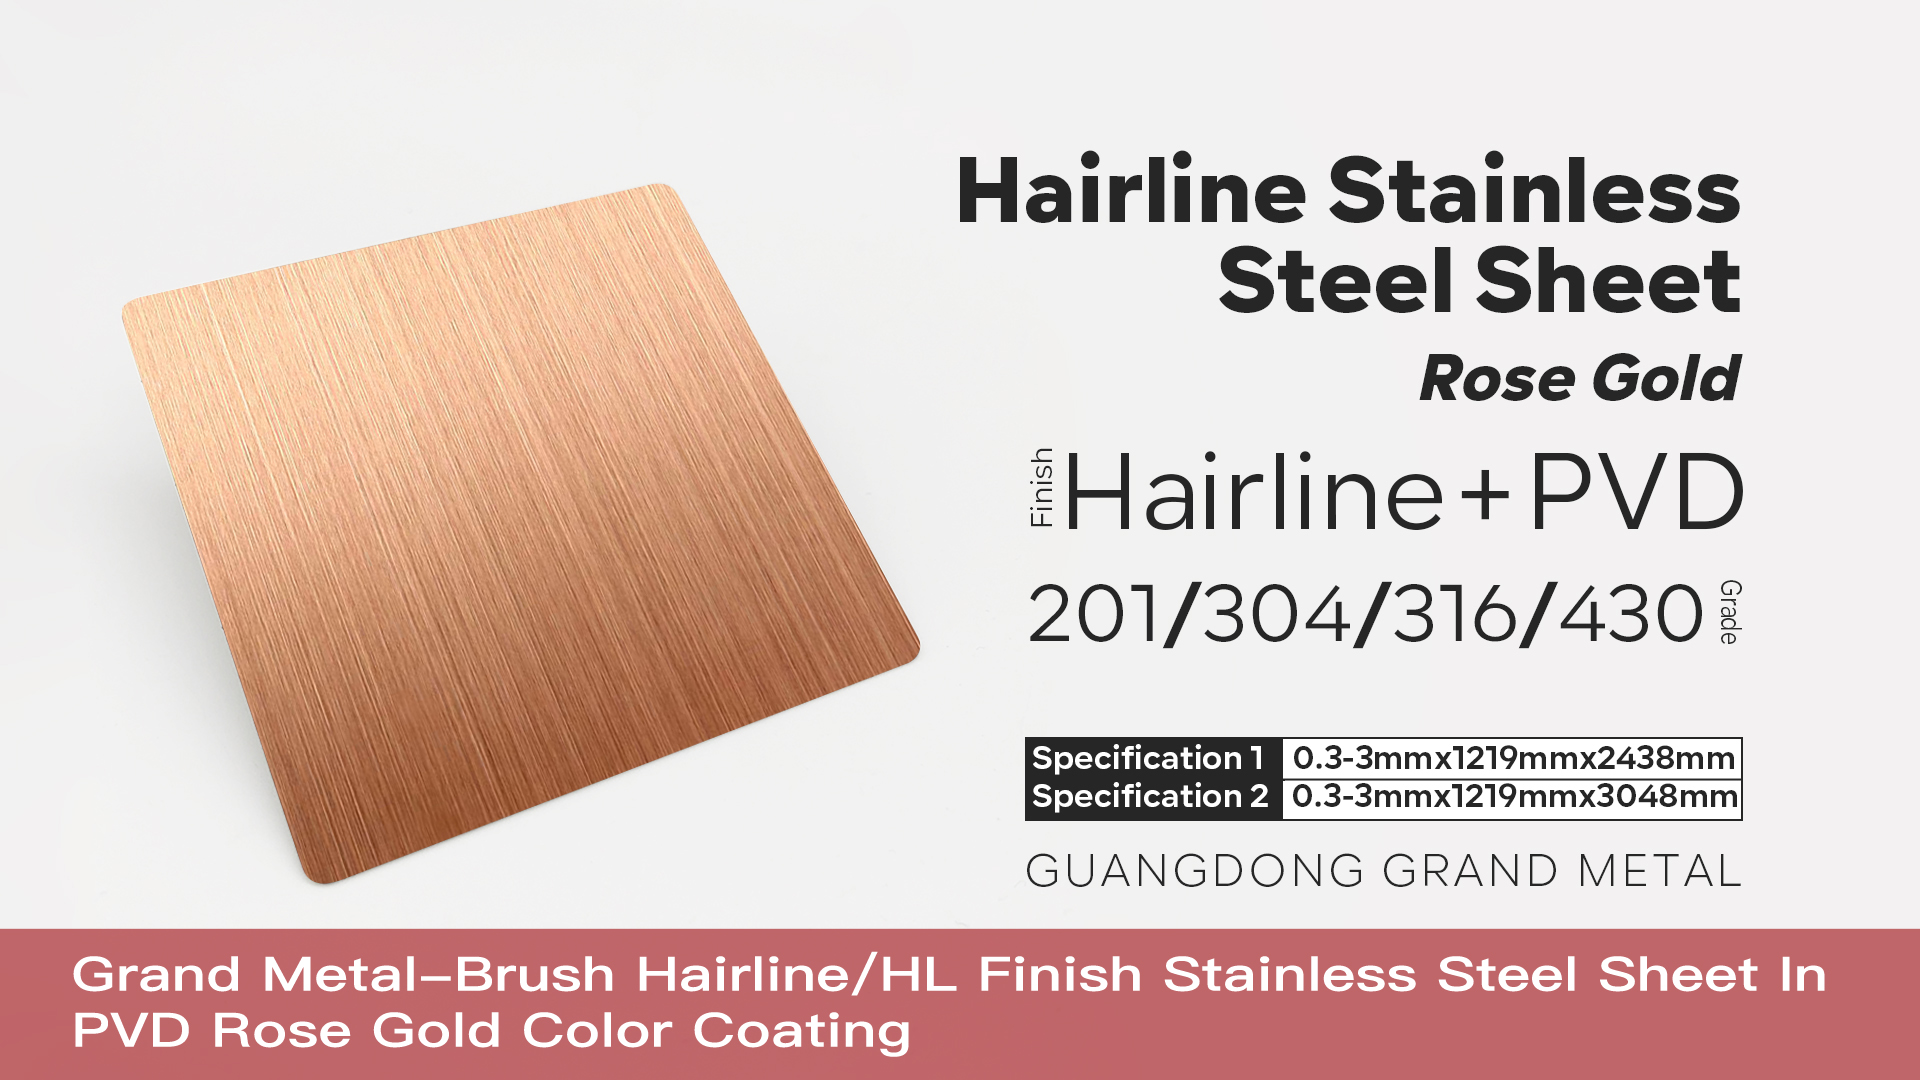 Brush Hairline/HL Finish Stainless Steel Sheet In PVD Rose Gold Color Coating